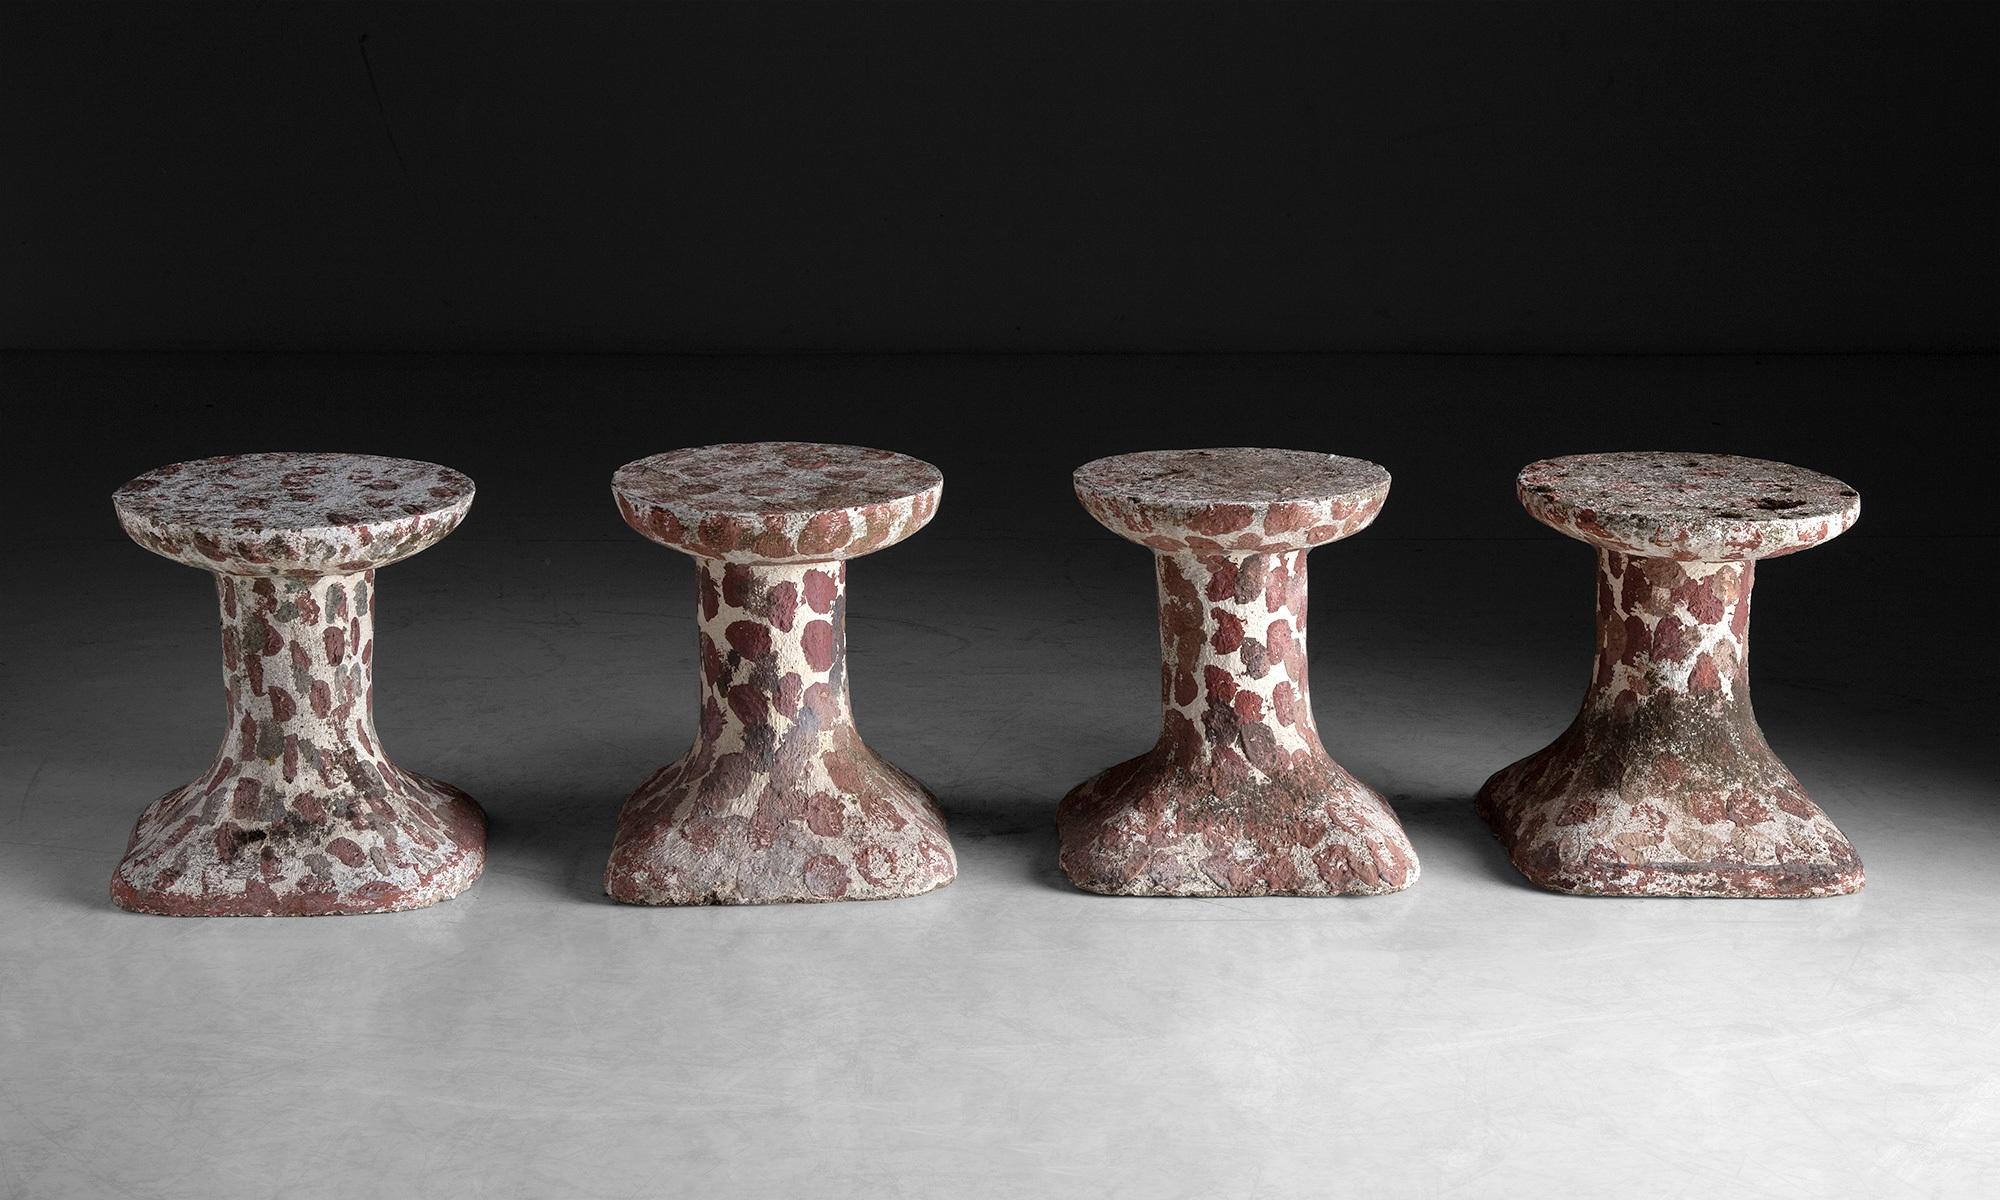 Cast Stone Stools by Emile Taugourdeau

France circa 1970

Sourced from his garden with original weathered paint.

14.5”w x 13”d x 15.5”h

*Please note the price is per unit, and the stools are sold individually*